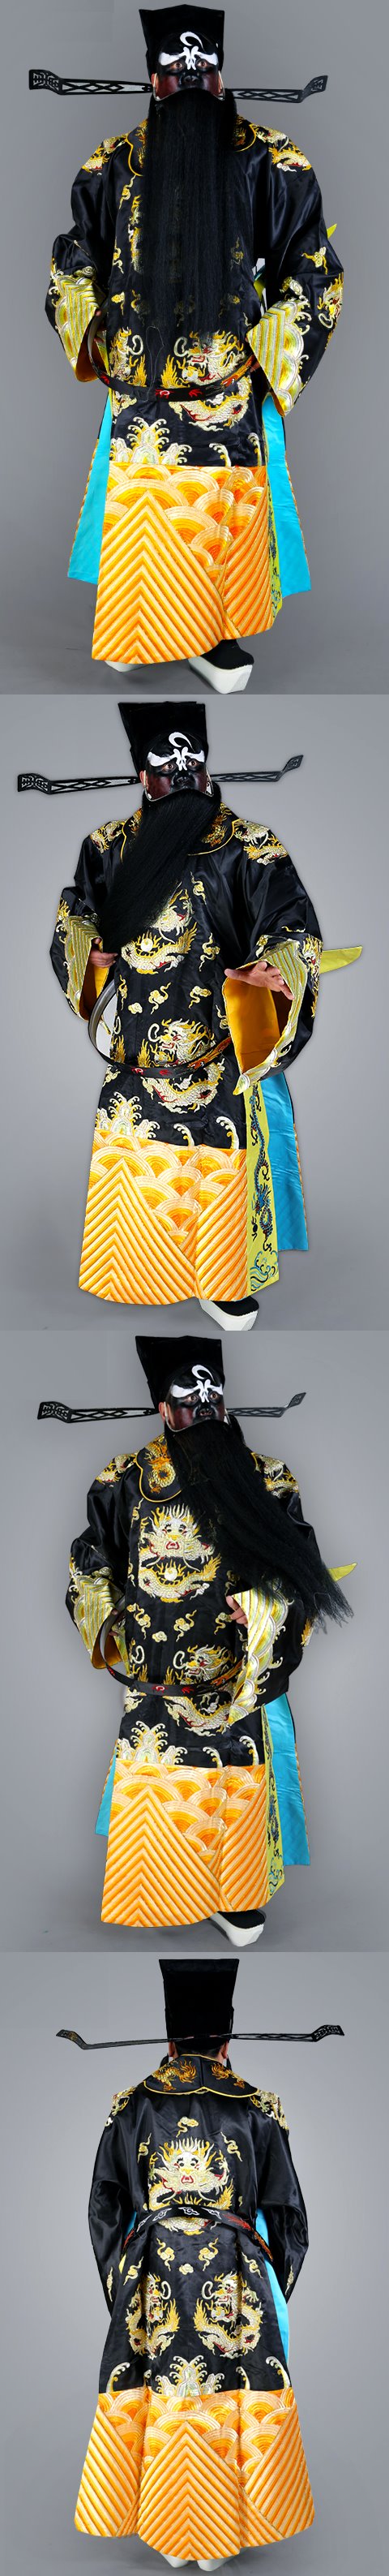 Chinese Ancient Character Costume - Bao Gong